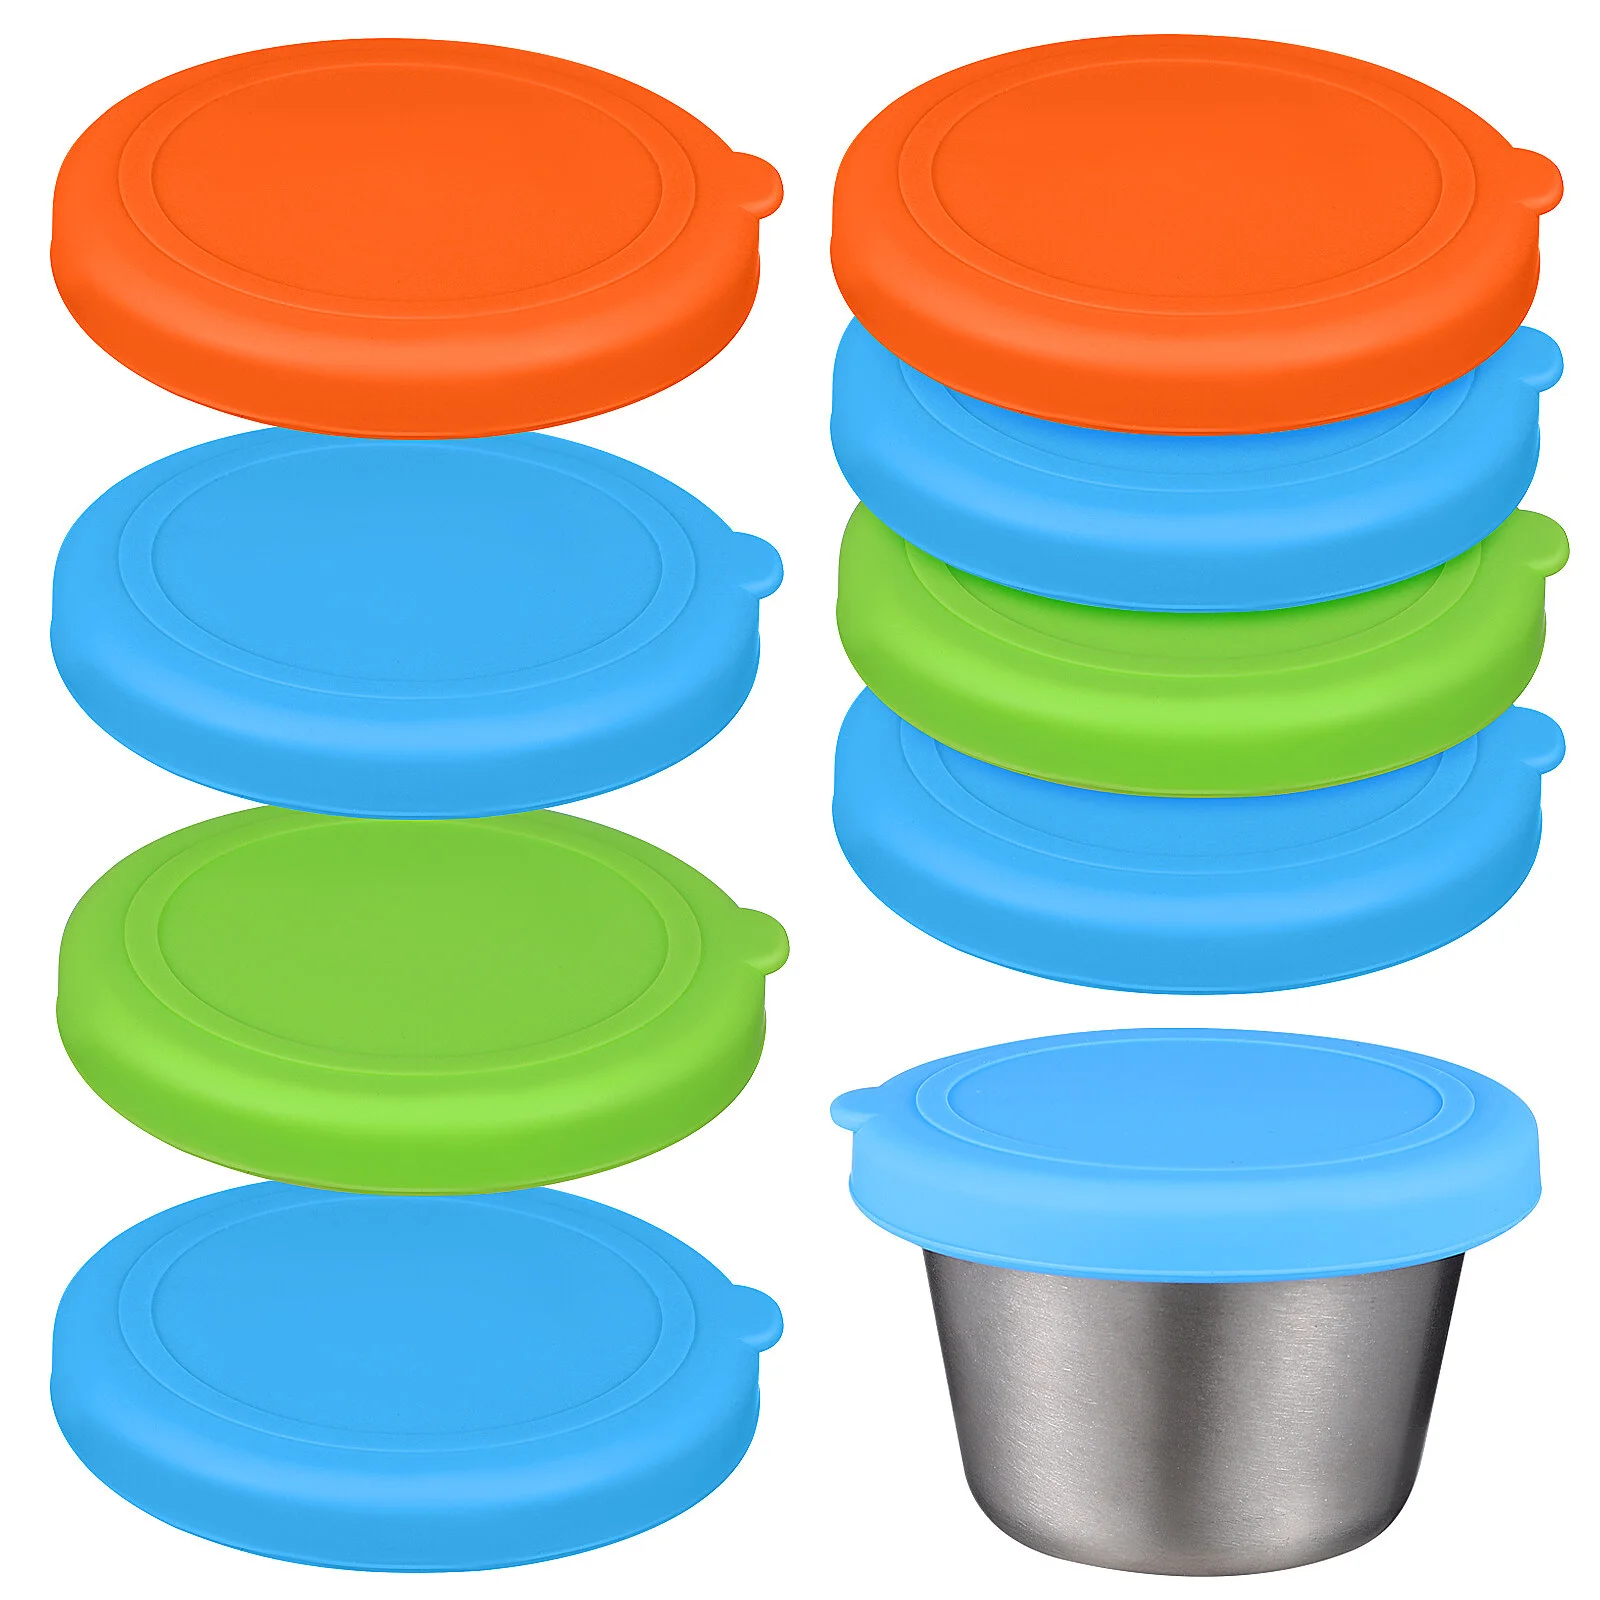 

8 Pcs Appetizer Silicone Lid Ketchup Dish Lids Dipping Sauce Cups Plate Cover Small Bowl Soy Bowls Silica Gel Seasoning